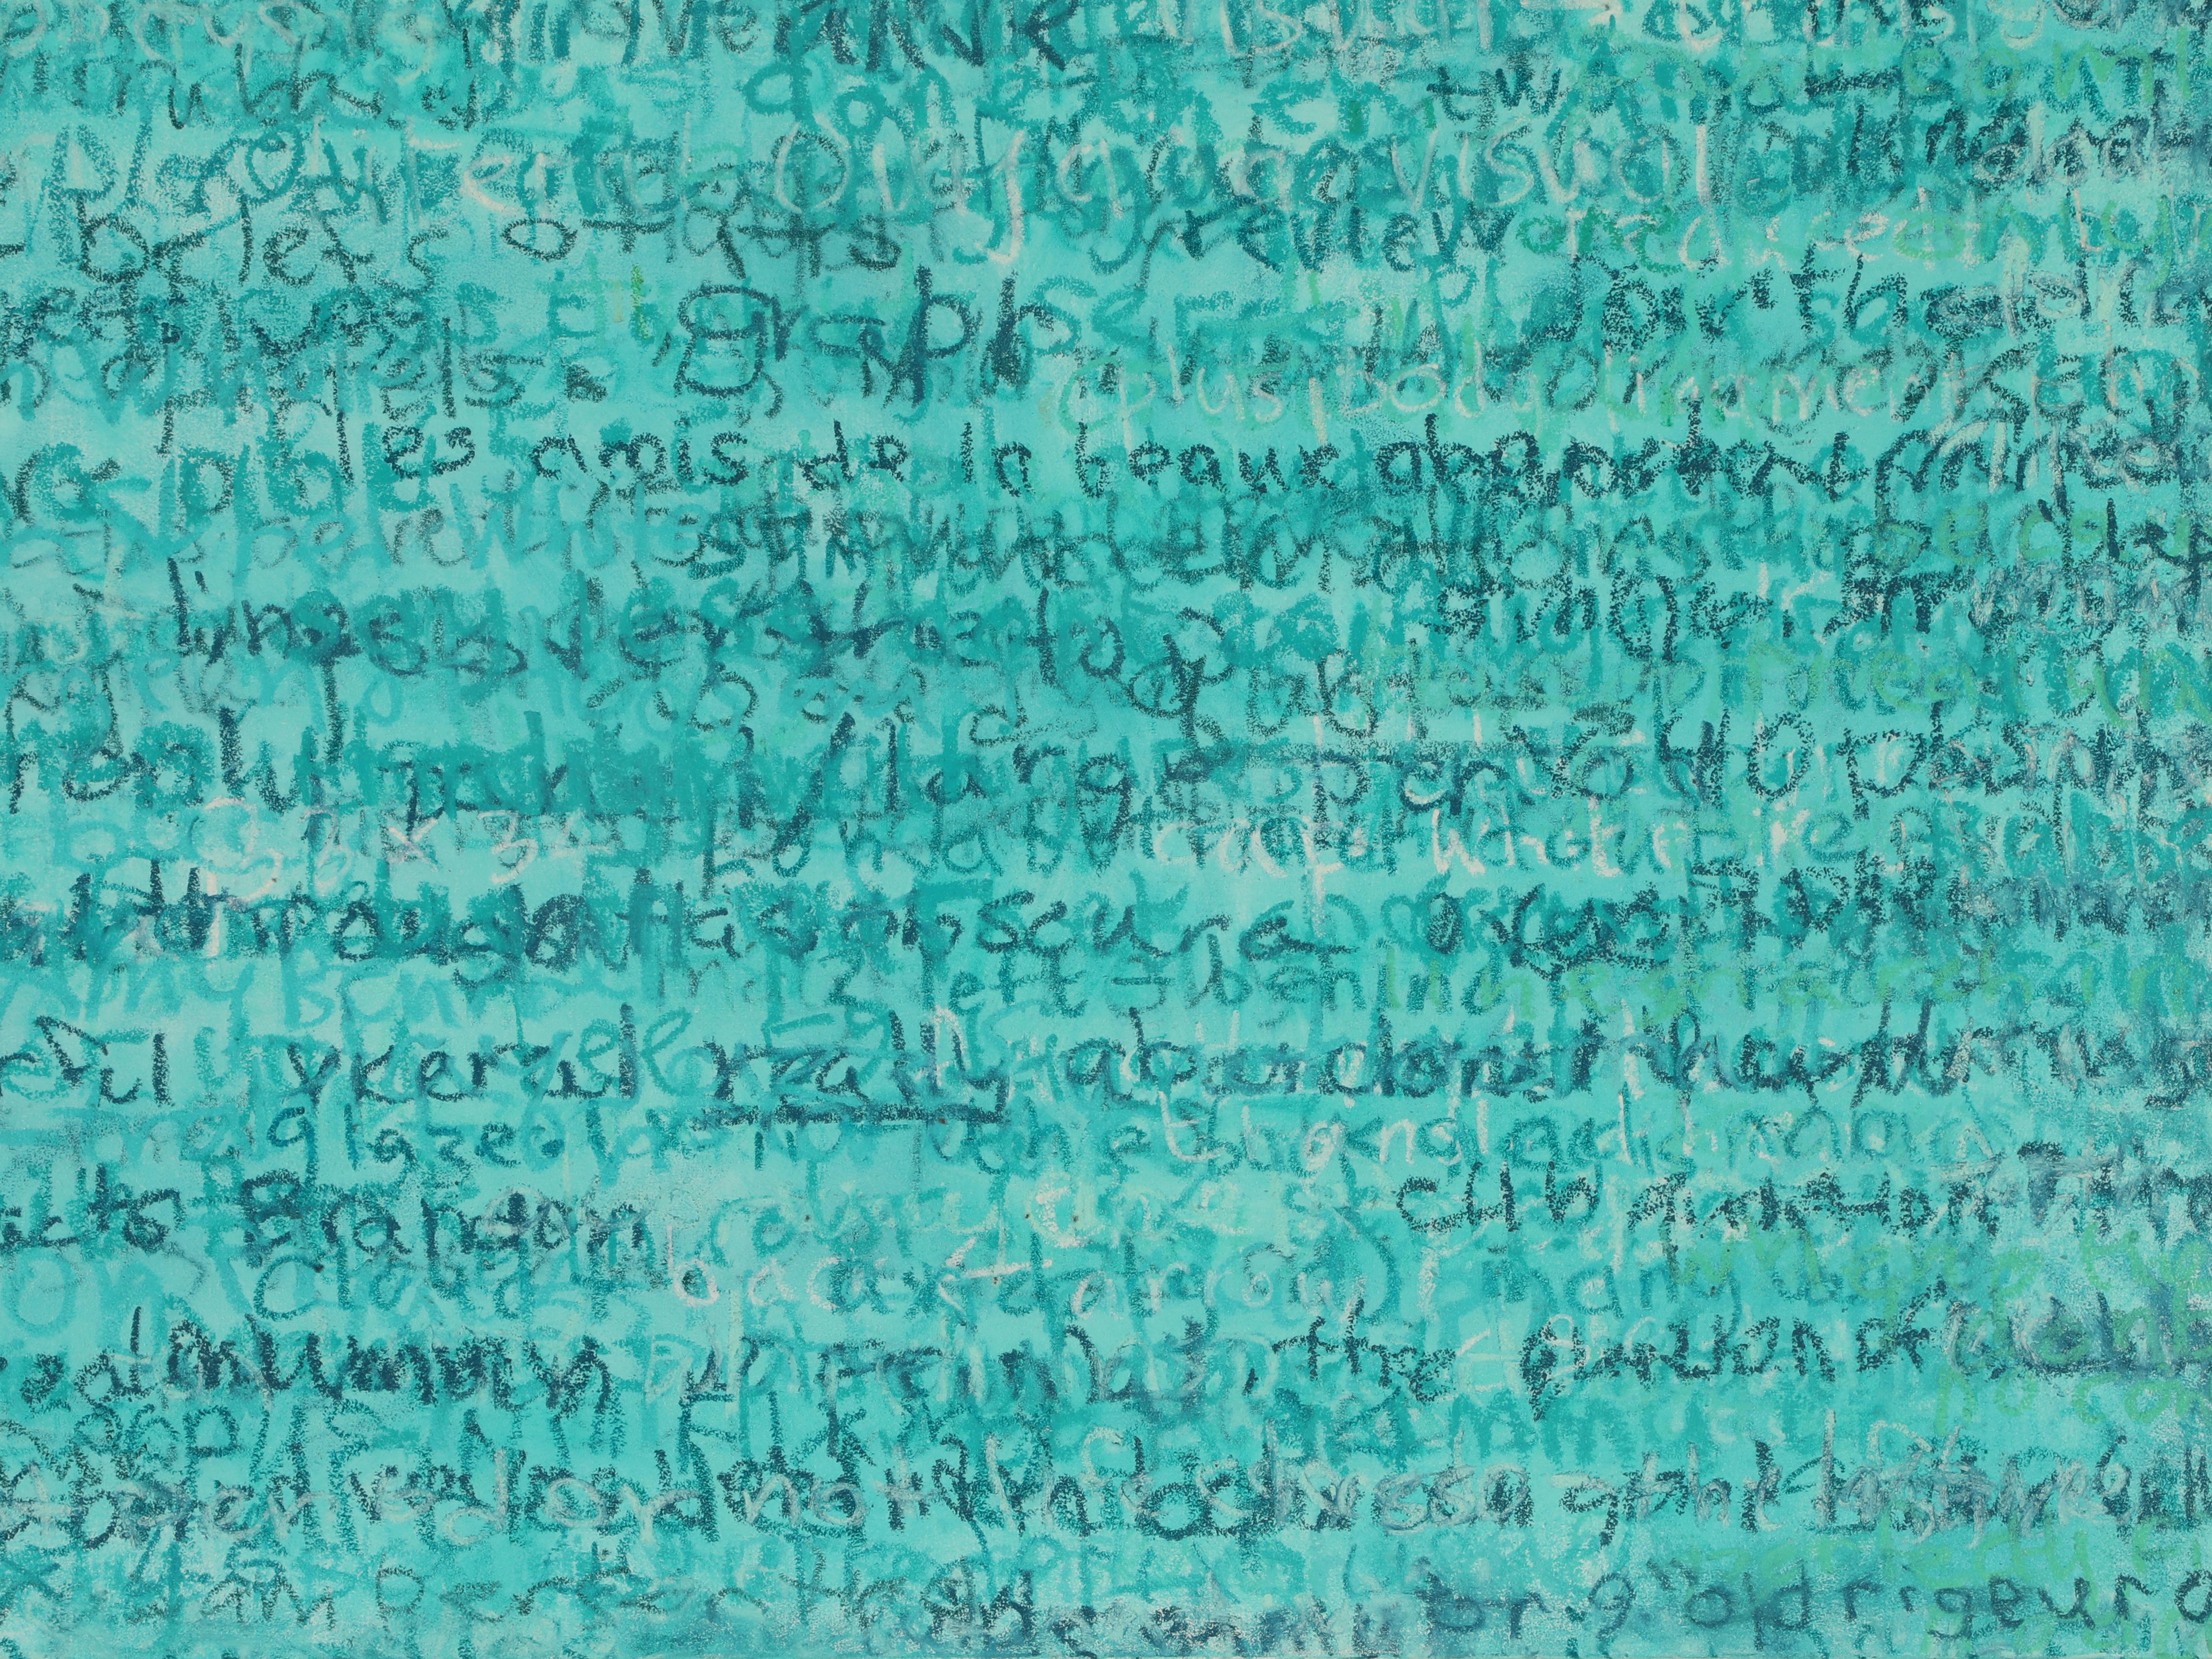 Green Proto Writing - Painting by Edward Povey